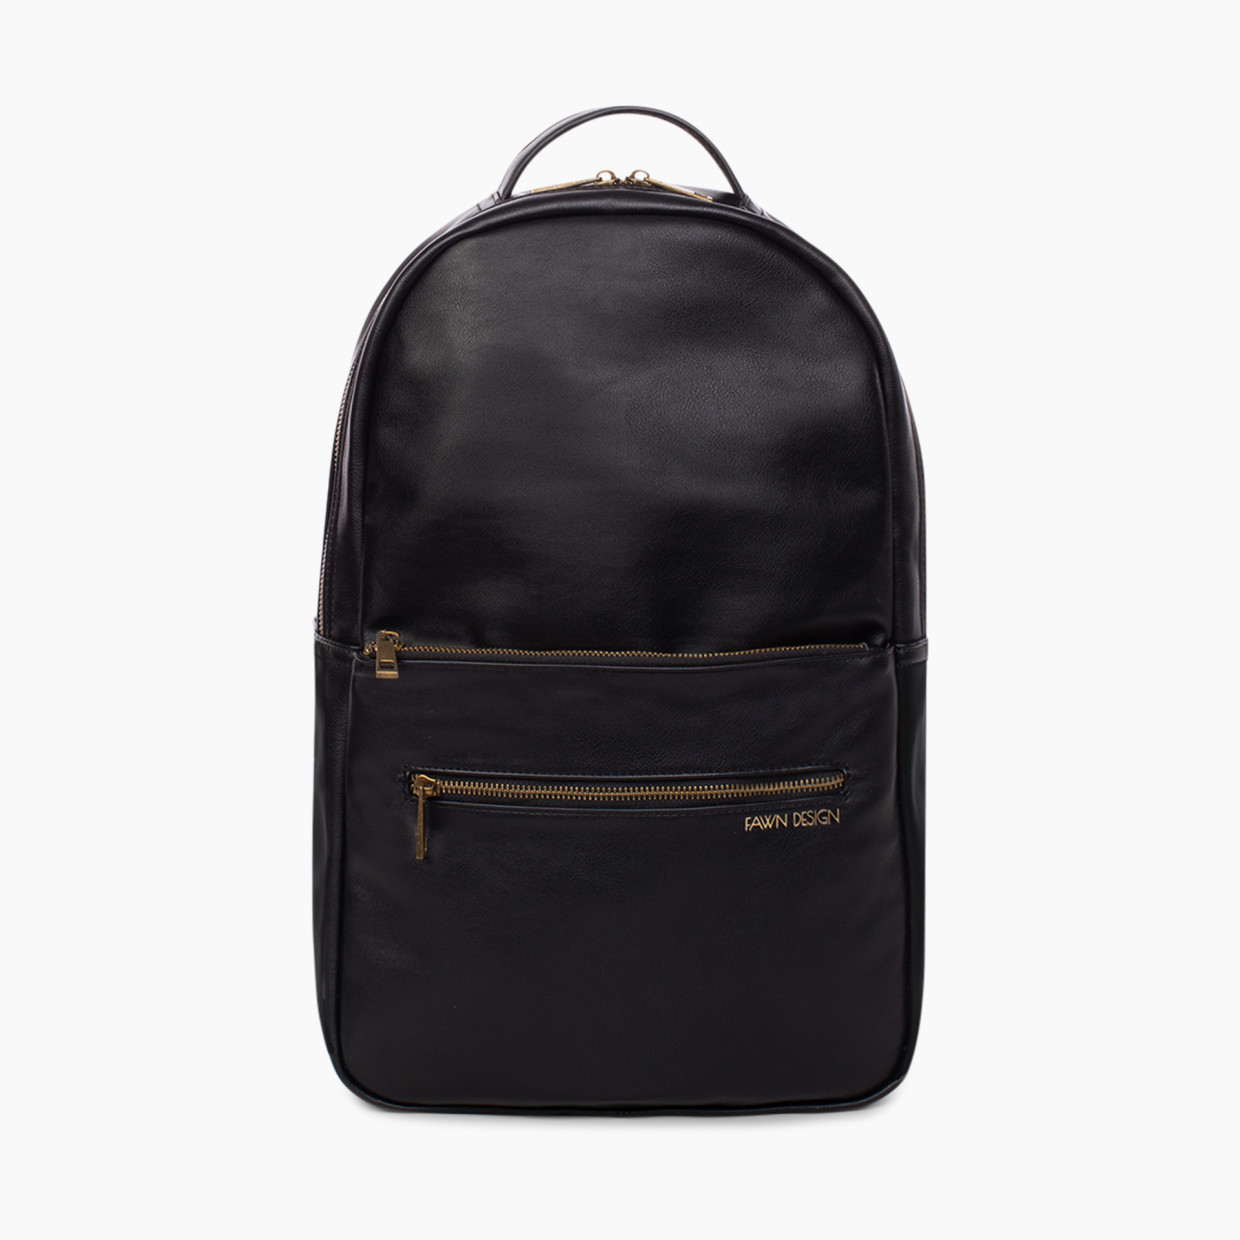 Fawn Design The Pack - Black.